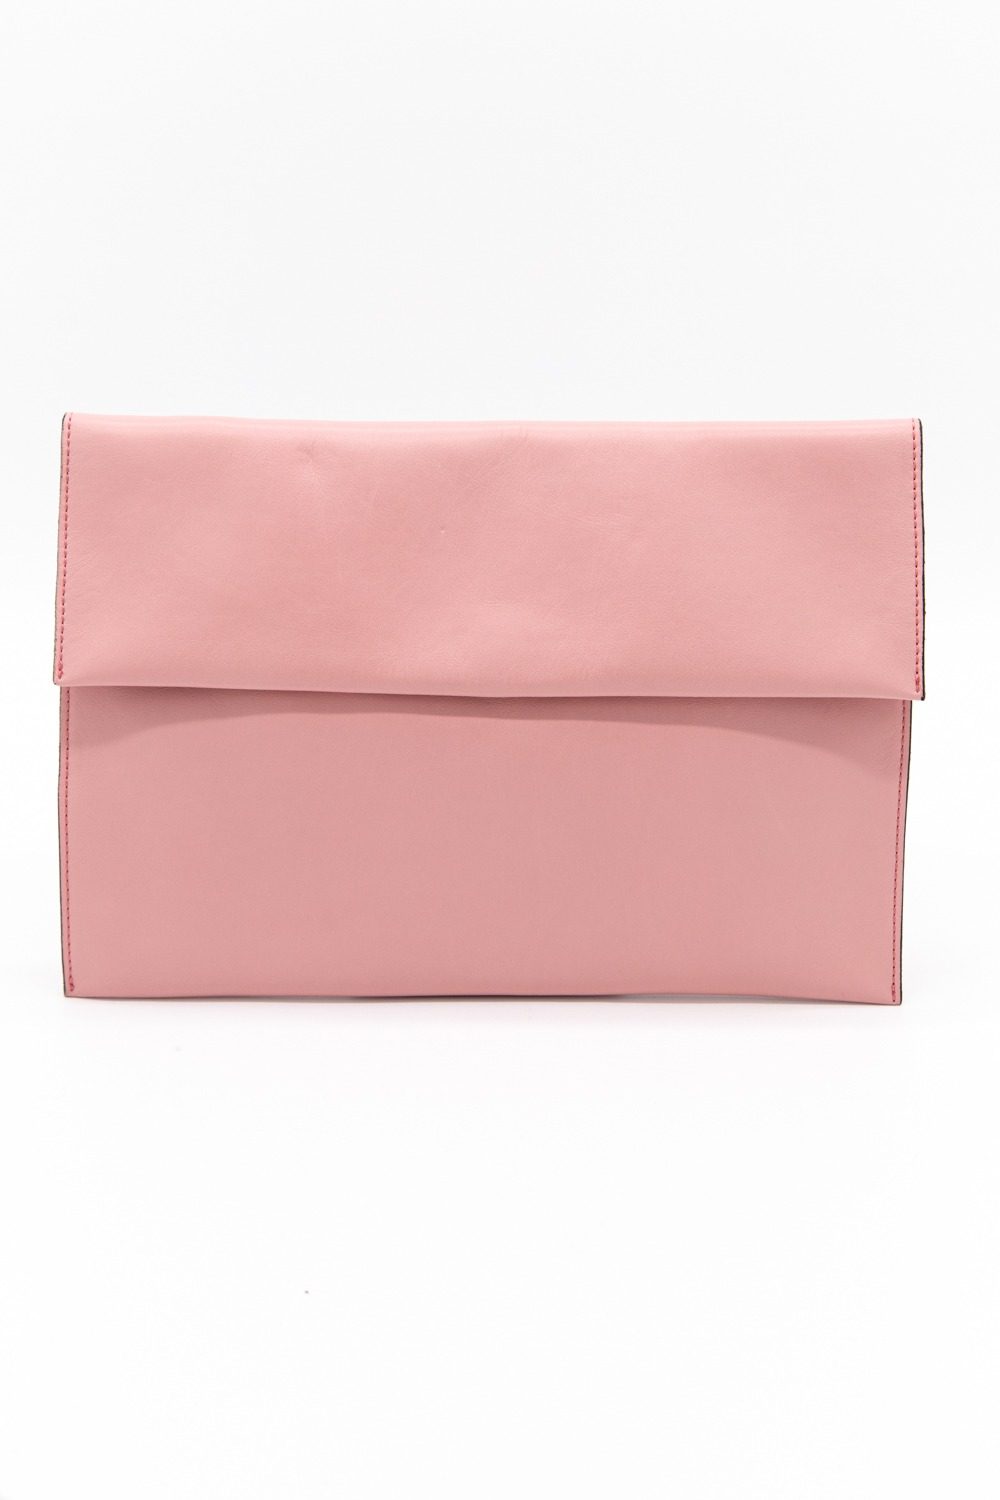 Thumbnail of http://Marni%20Clutch%20in%20Rosa